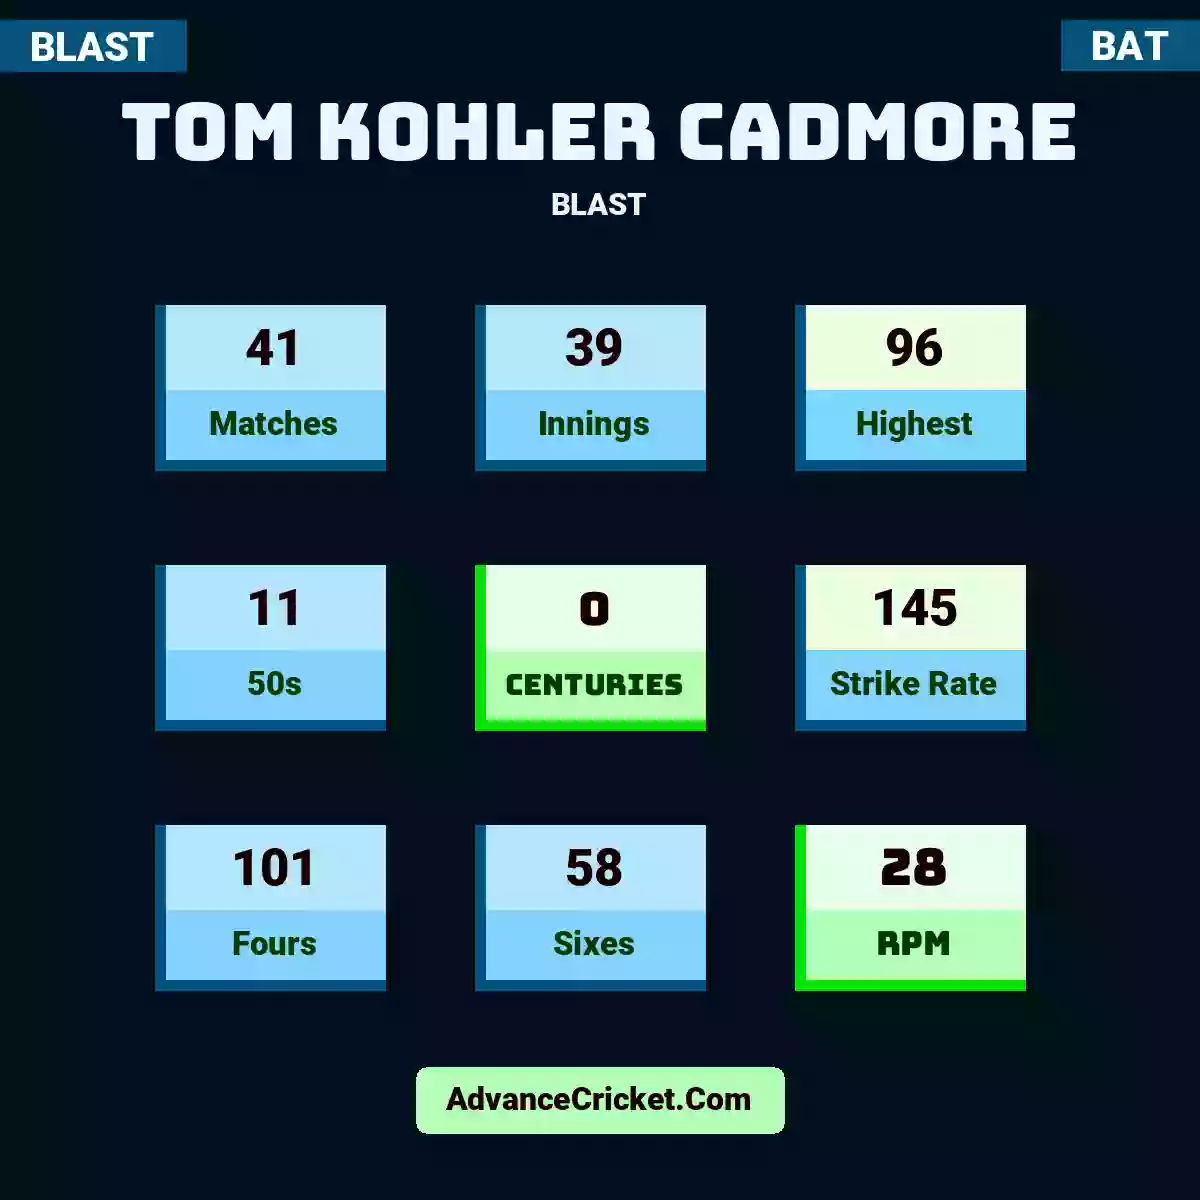 Tom Kohler Cadmore BLAST , Tom Kohler Cadmore played 41 matches, scored 96 runs as highest, 11 half-centuries, and 0 centuries, with a strike rate of 145. T.Cadmore hit 101 fours and 58 sixes, with an RPM of 28.